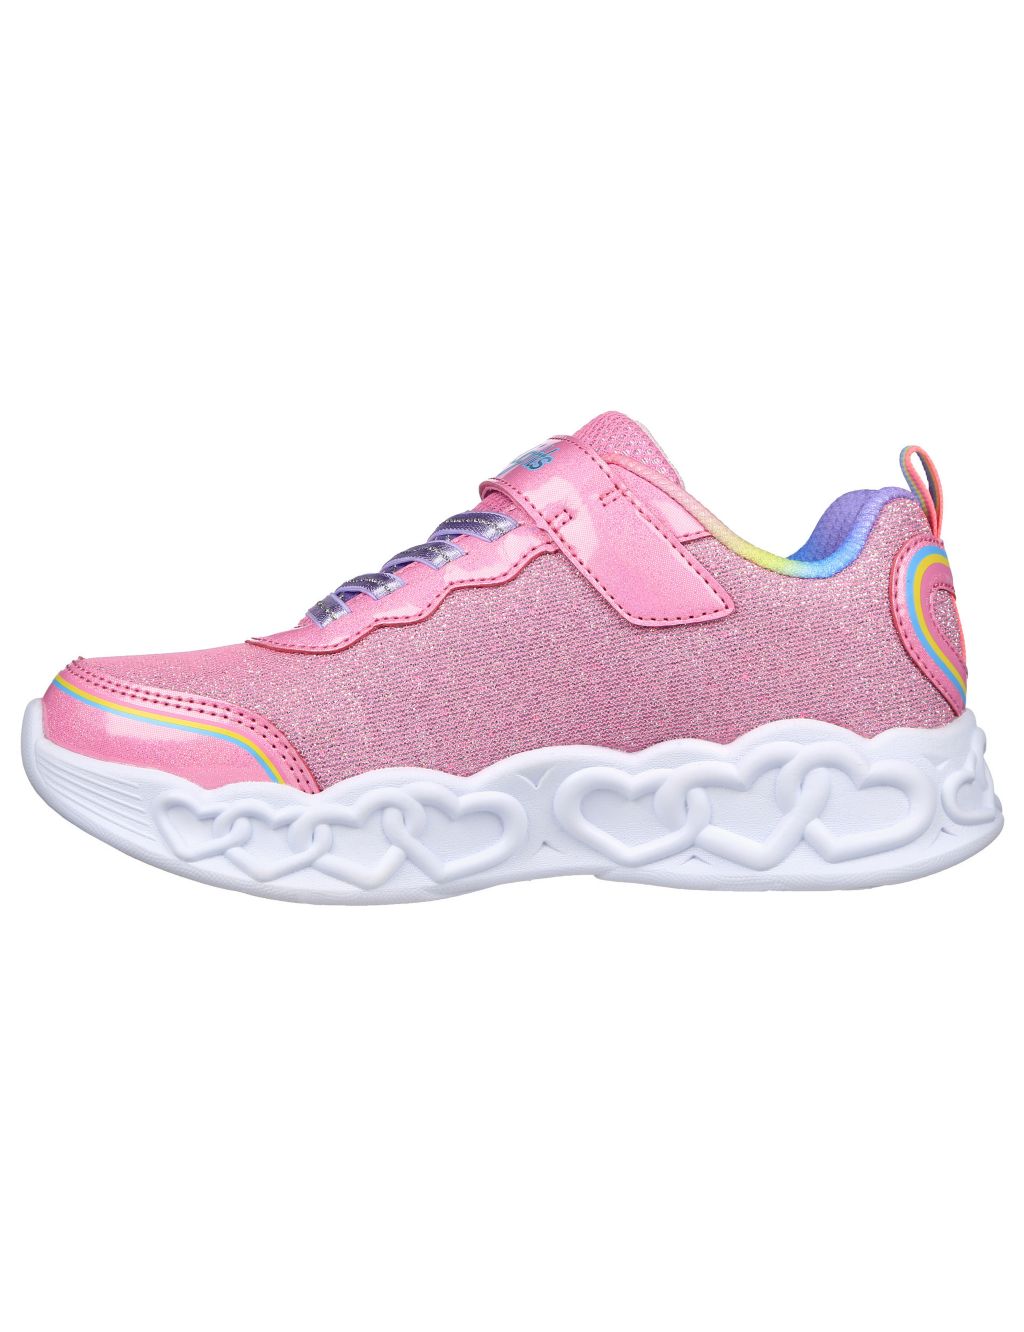 Infinite Heart Lights Love Prism Trainers (9.5 Small - 3 Large) image 6